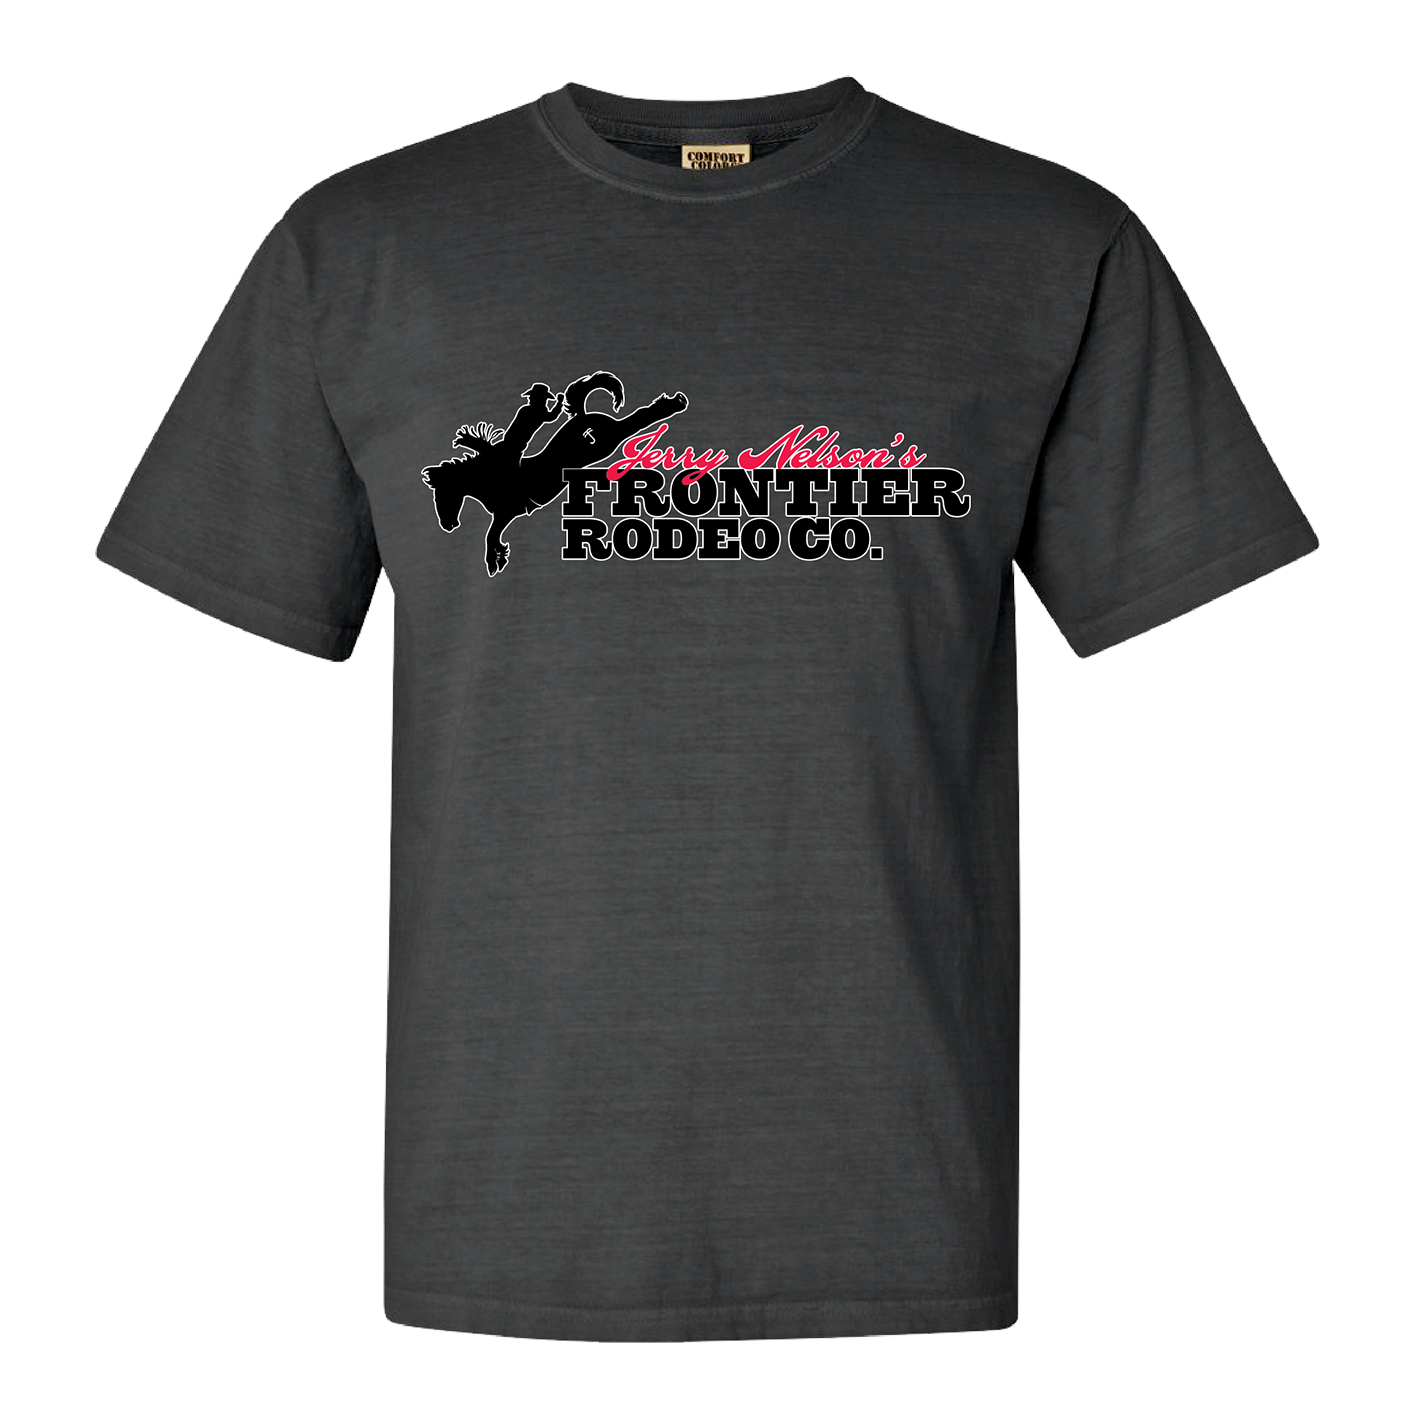 Frontier Rodeo Swag – Frontier Rodeo Company